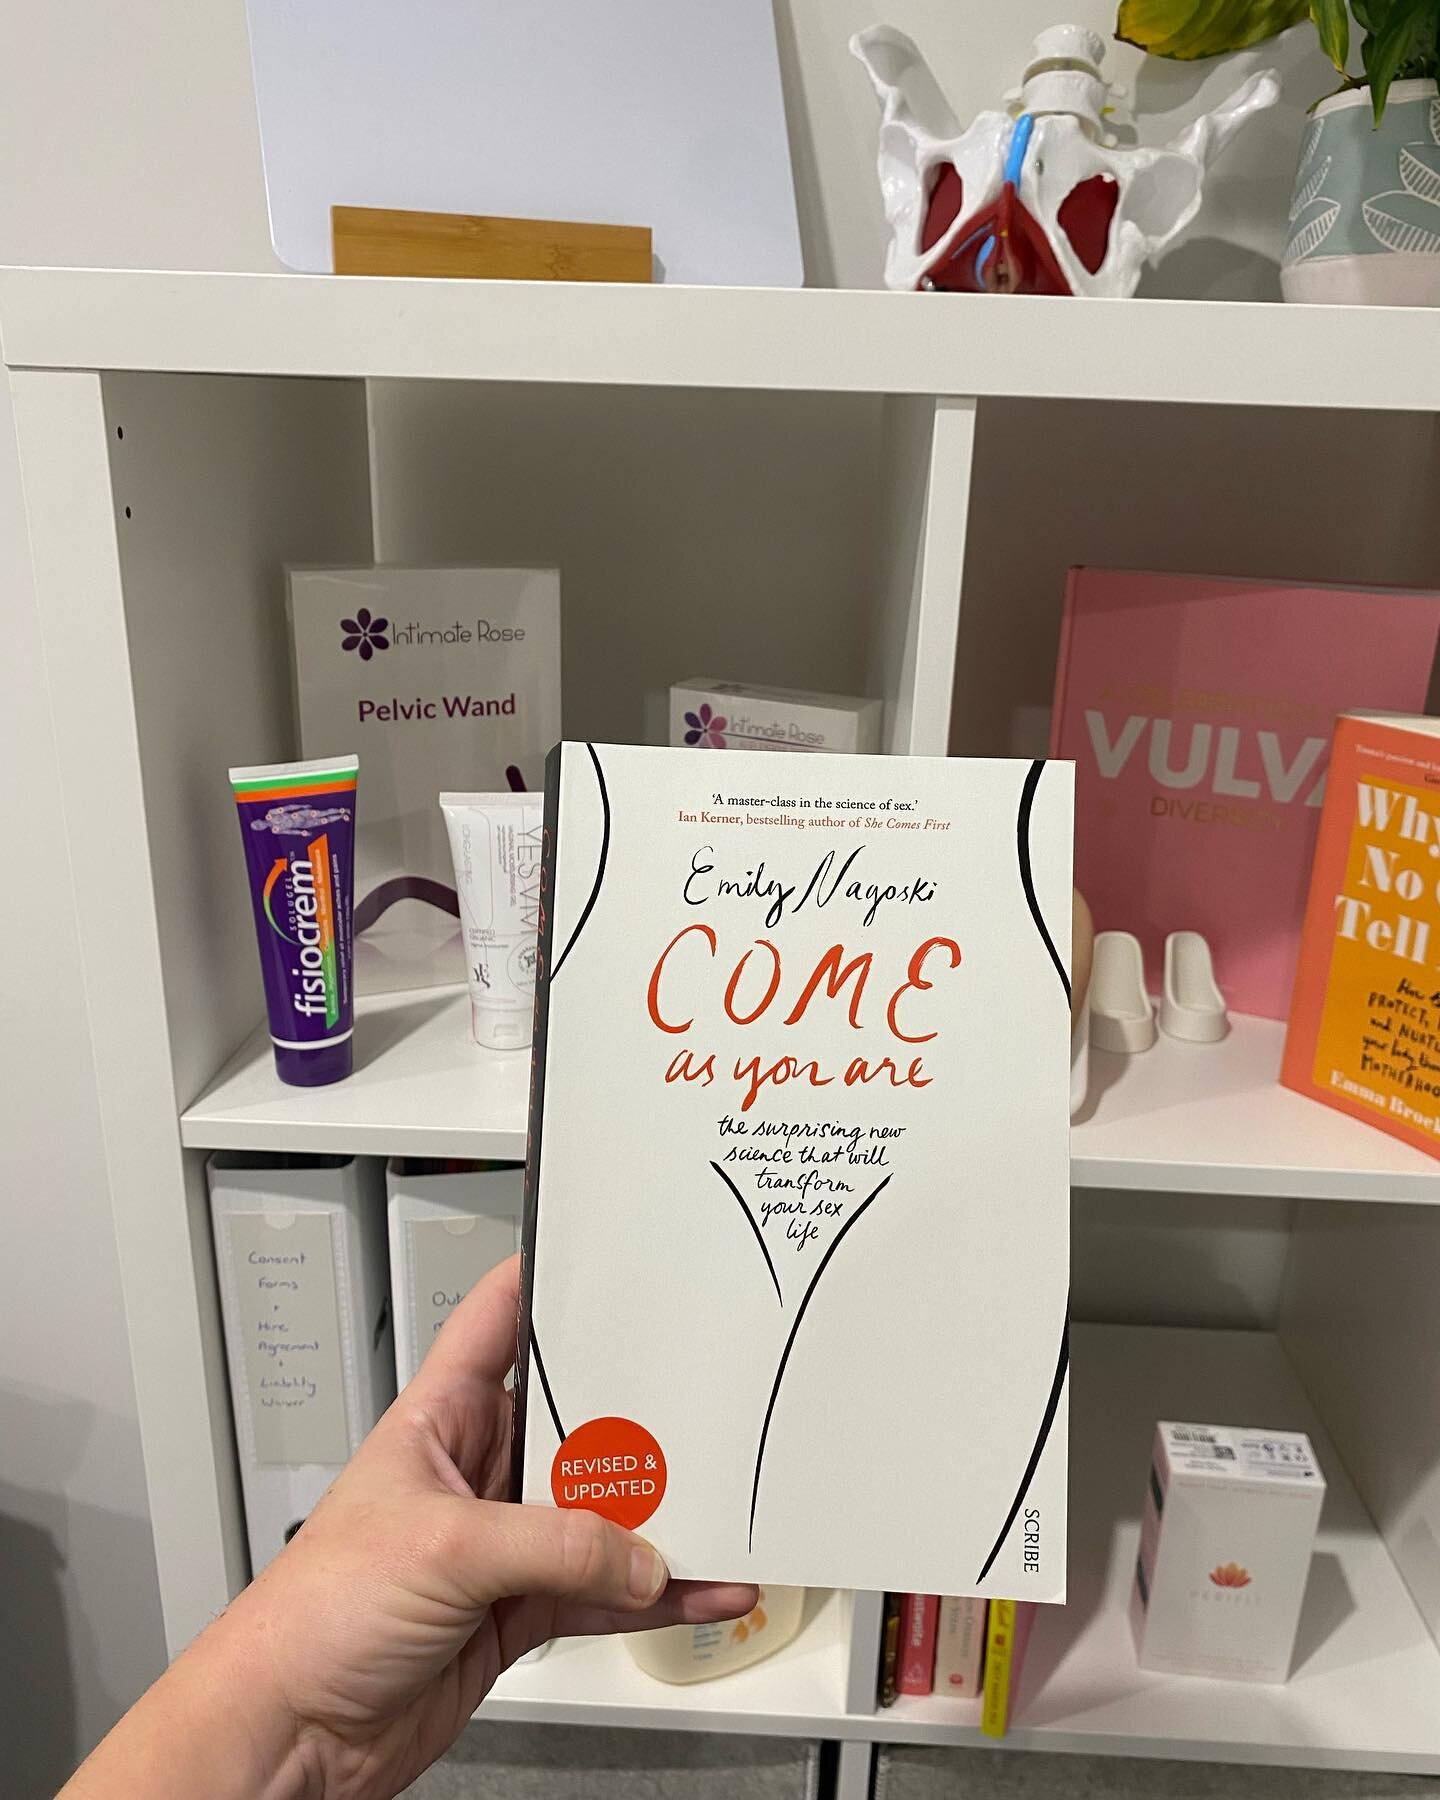 Our book club book for this month is Come As You Are by @enagoski and we HIGHLY recommend this book to ALL women, but especially anyone with pelvic pain looking to better understand how to make intimacy more pleasurable. 

It&rsquo;s a book about the